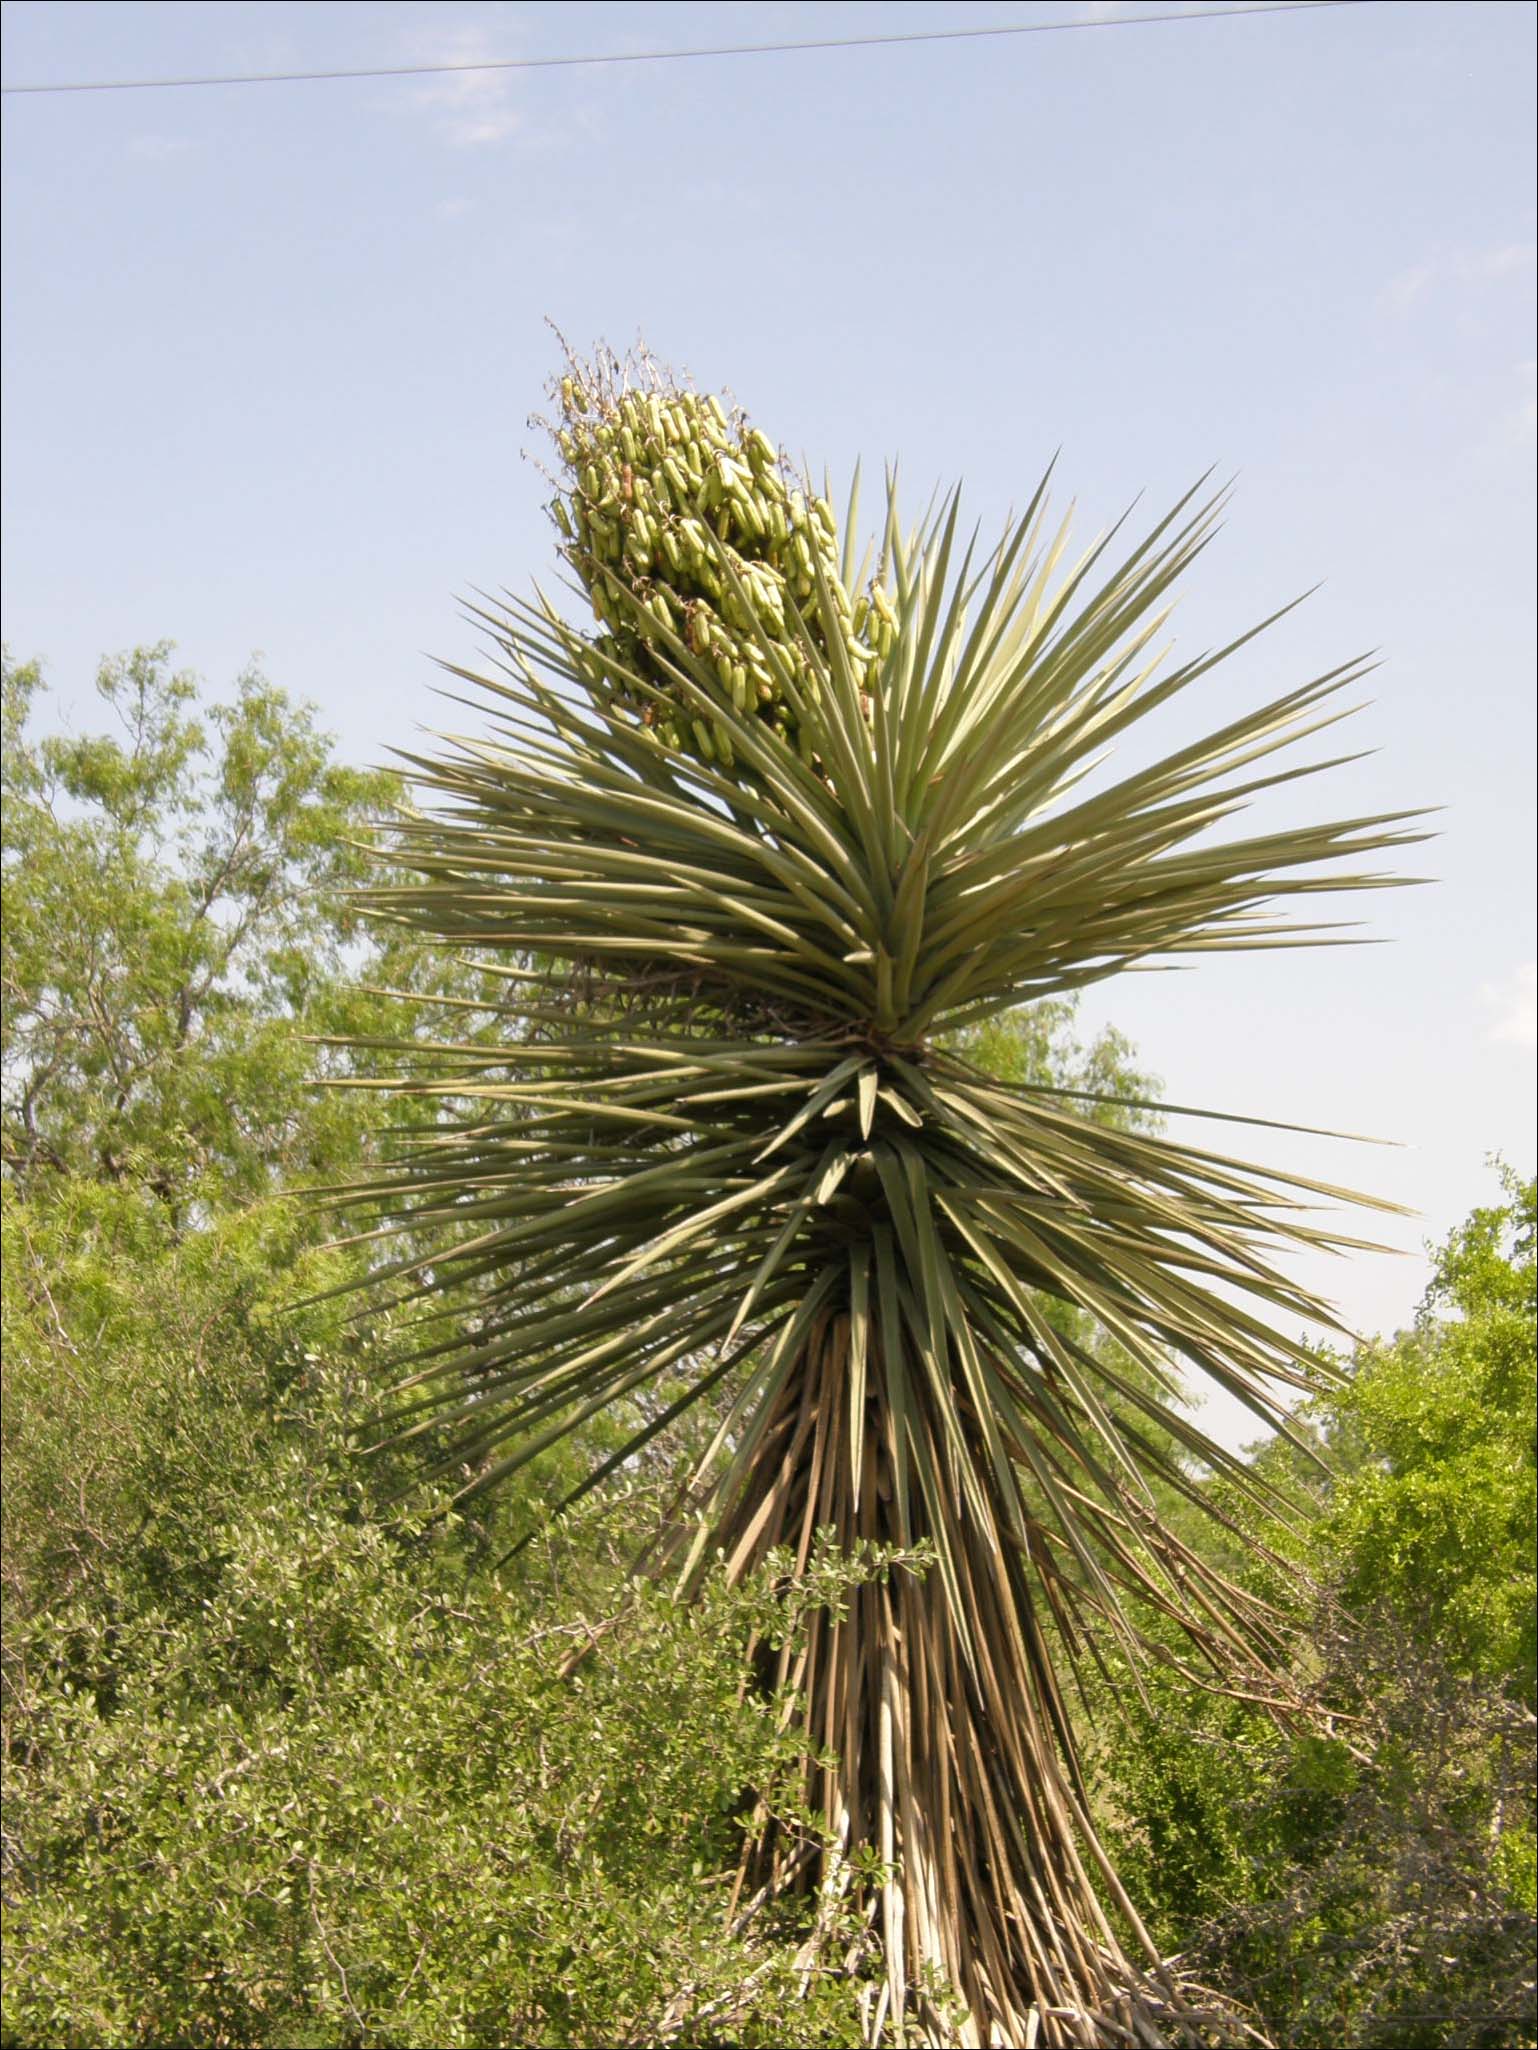 Overview of Yucca treculeana